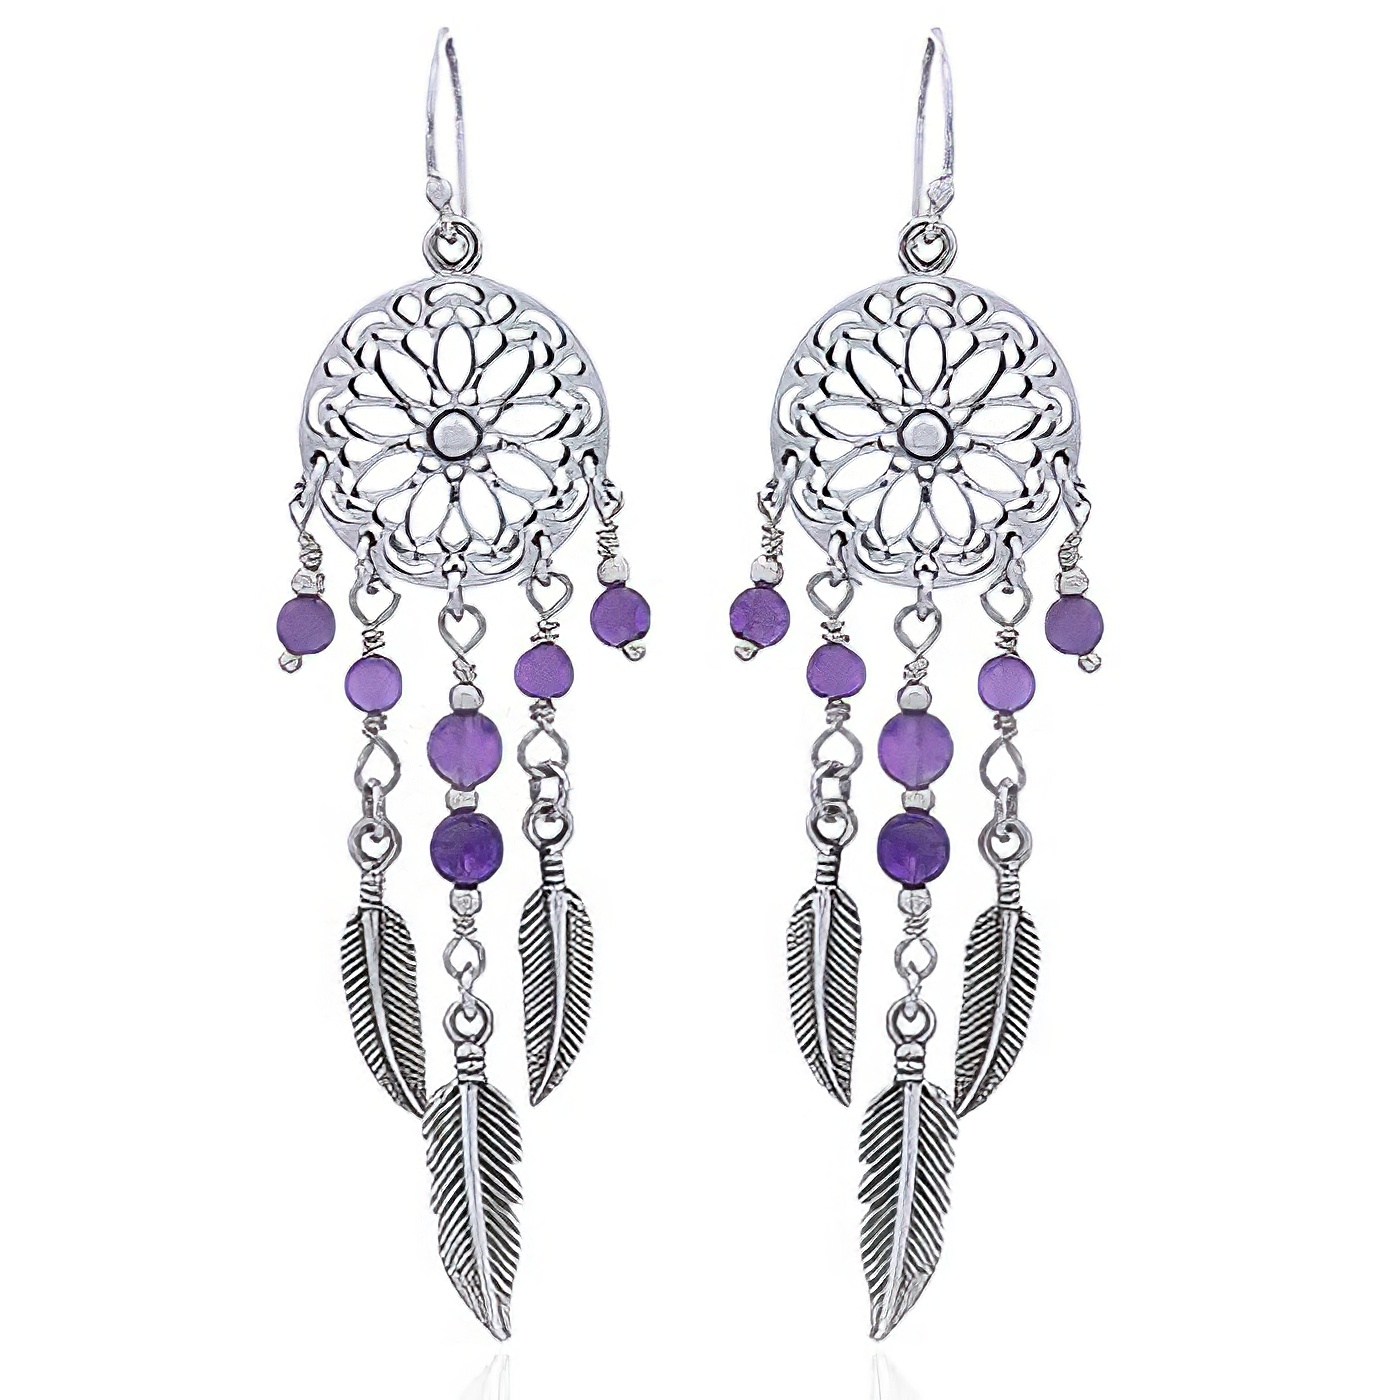 Silver and Amethyst Dream Catcher Earrings by BeYindi 